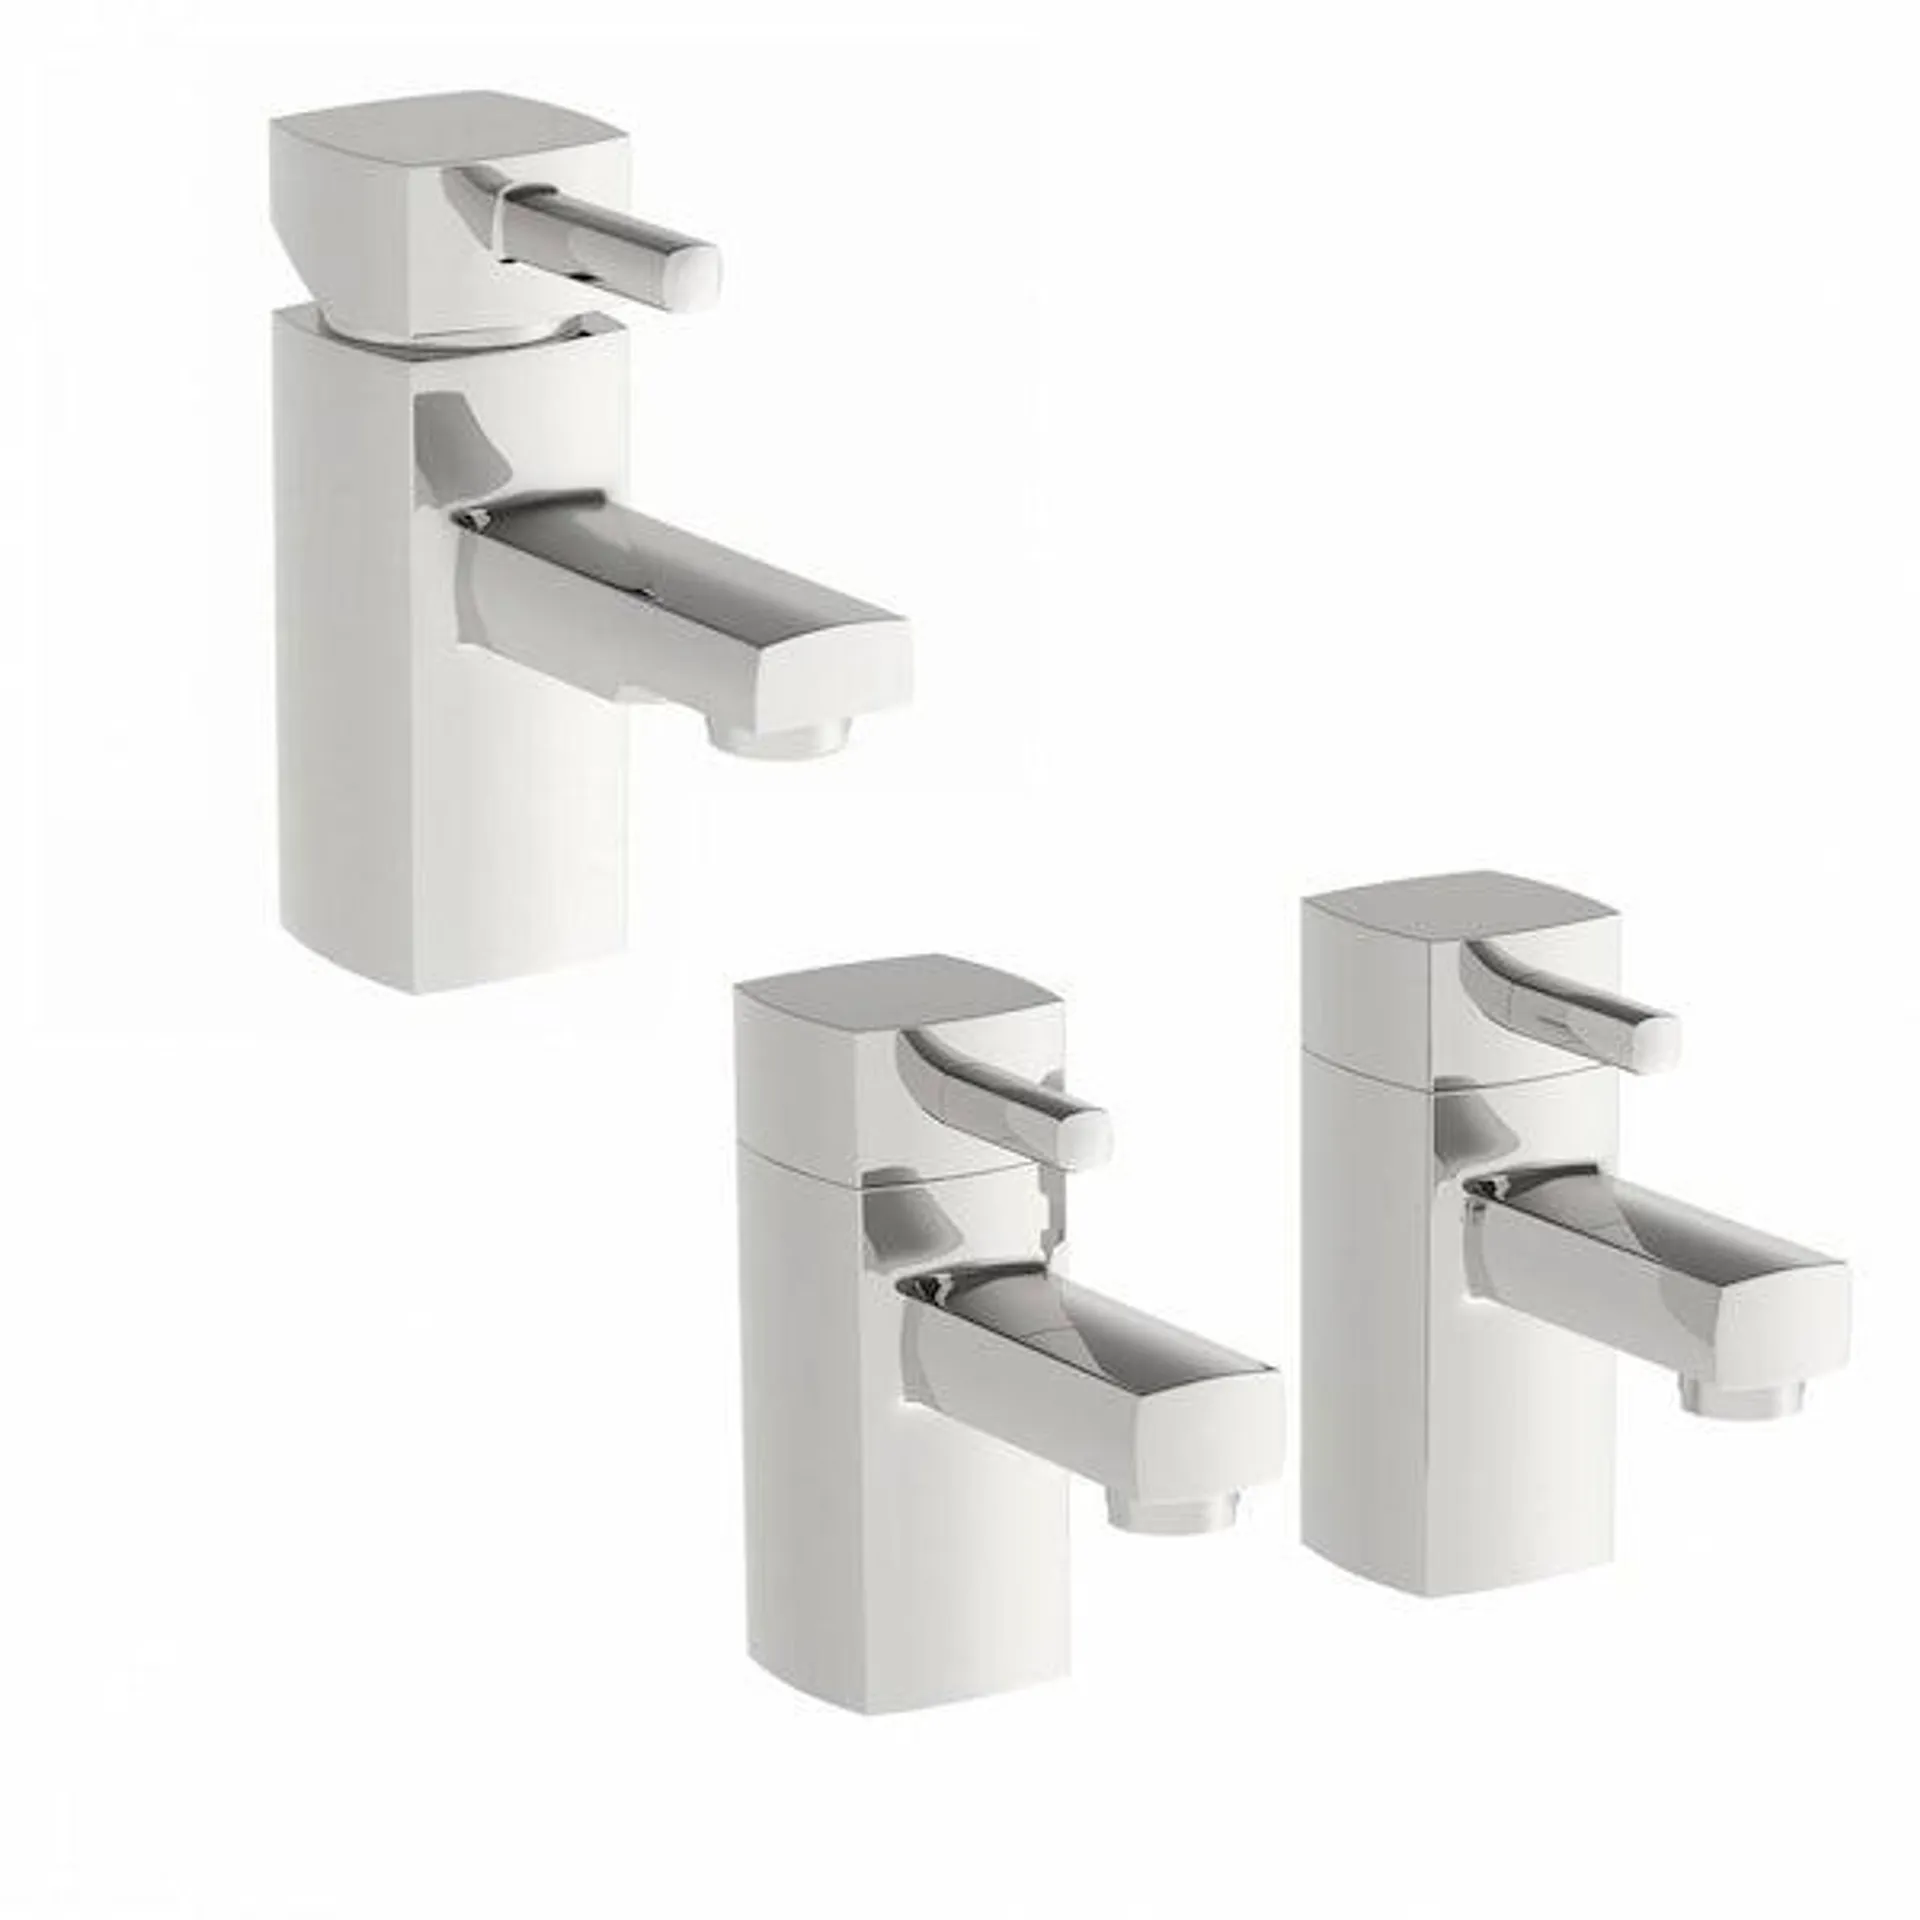 Orchard Derwent basin mixer and bath tap pack